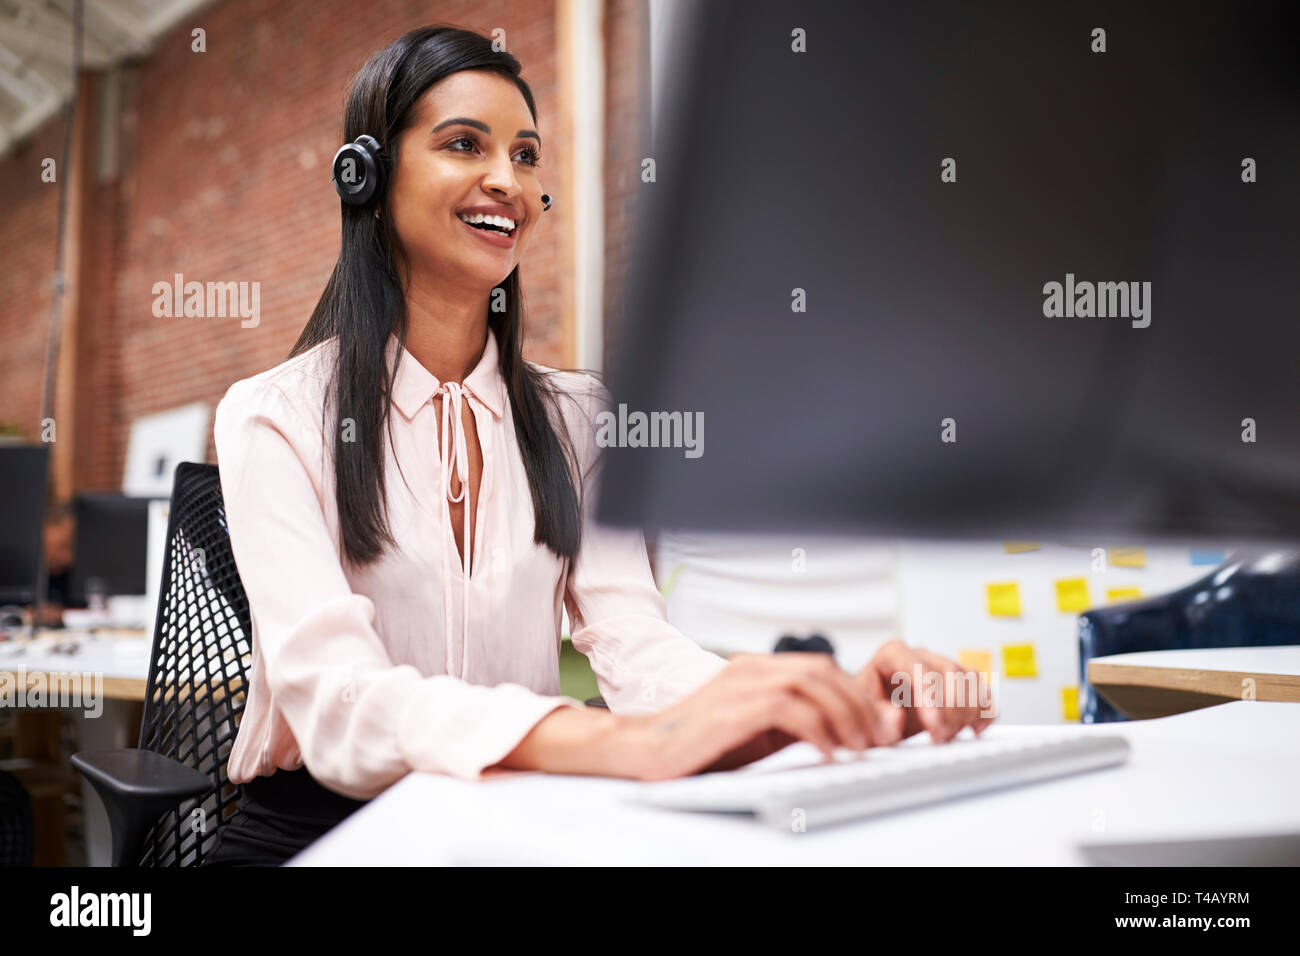 Female Customer Services Agent Working At Desk In Call Center Stock Photo